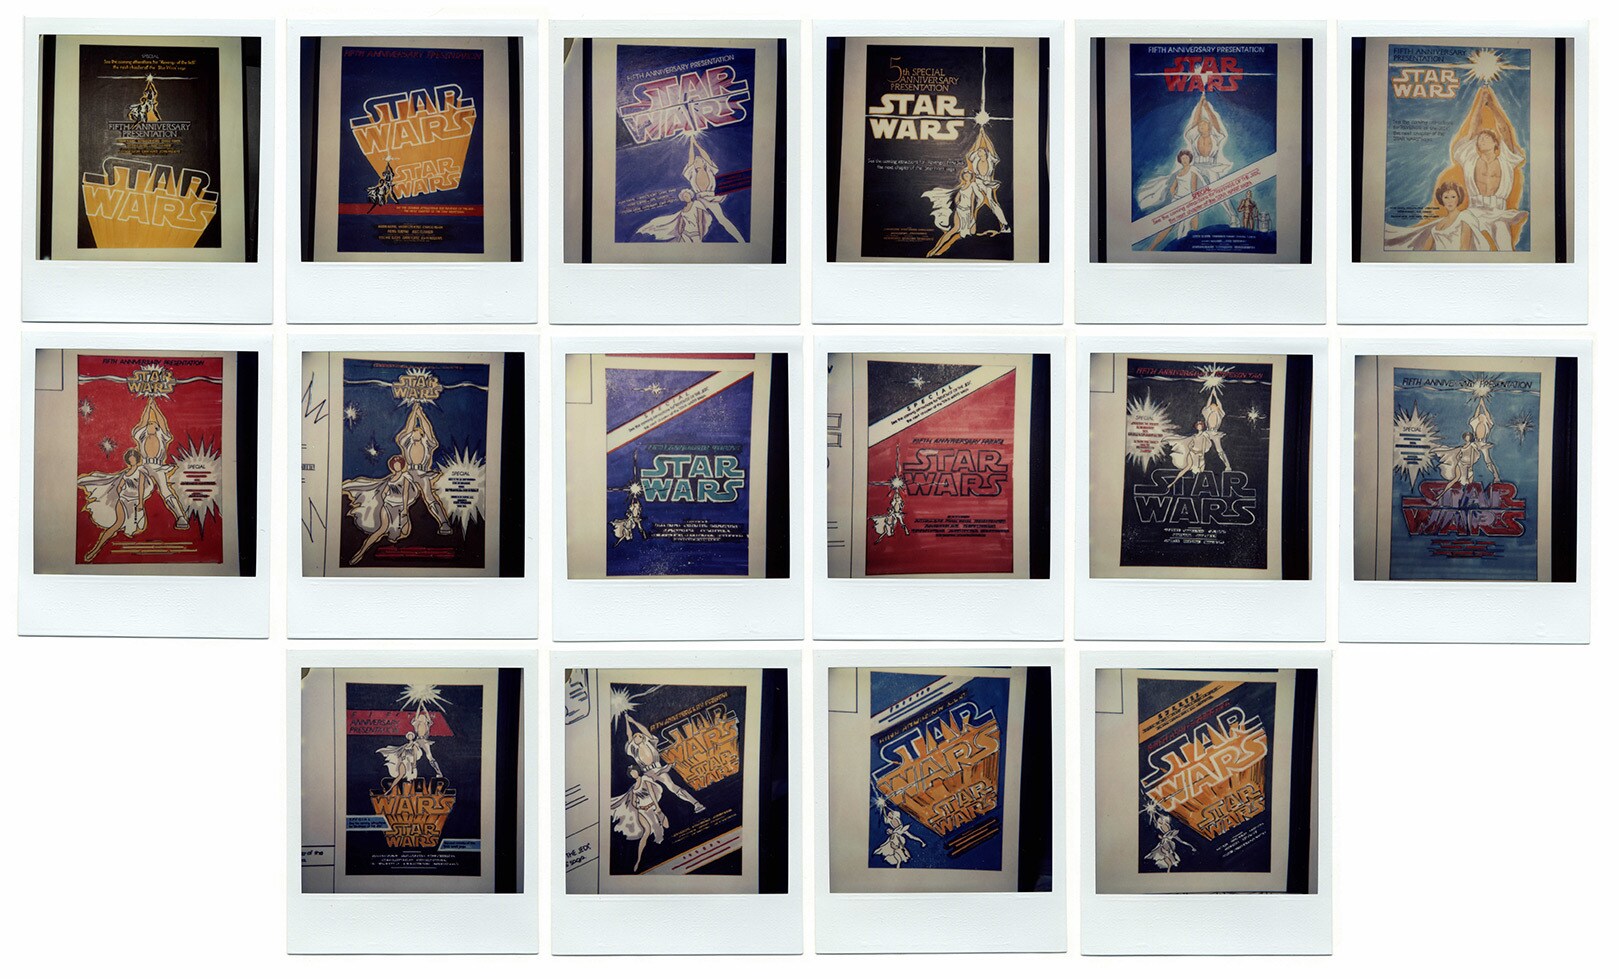 Polaroid pictures of vintage Star Wars posters.